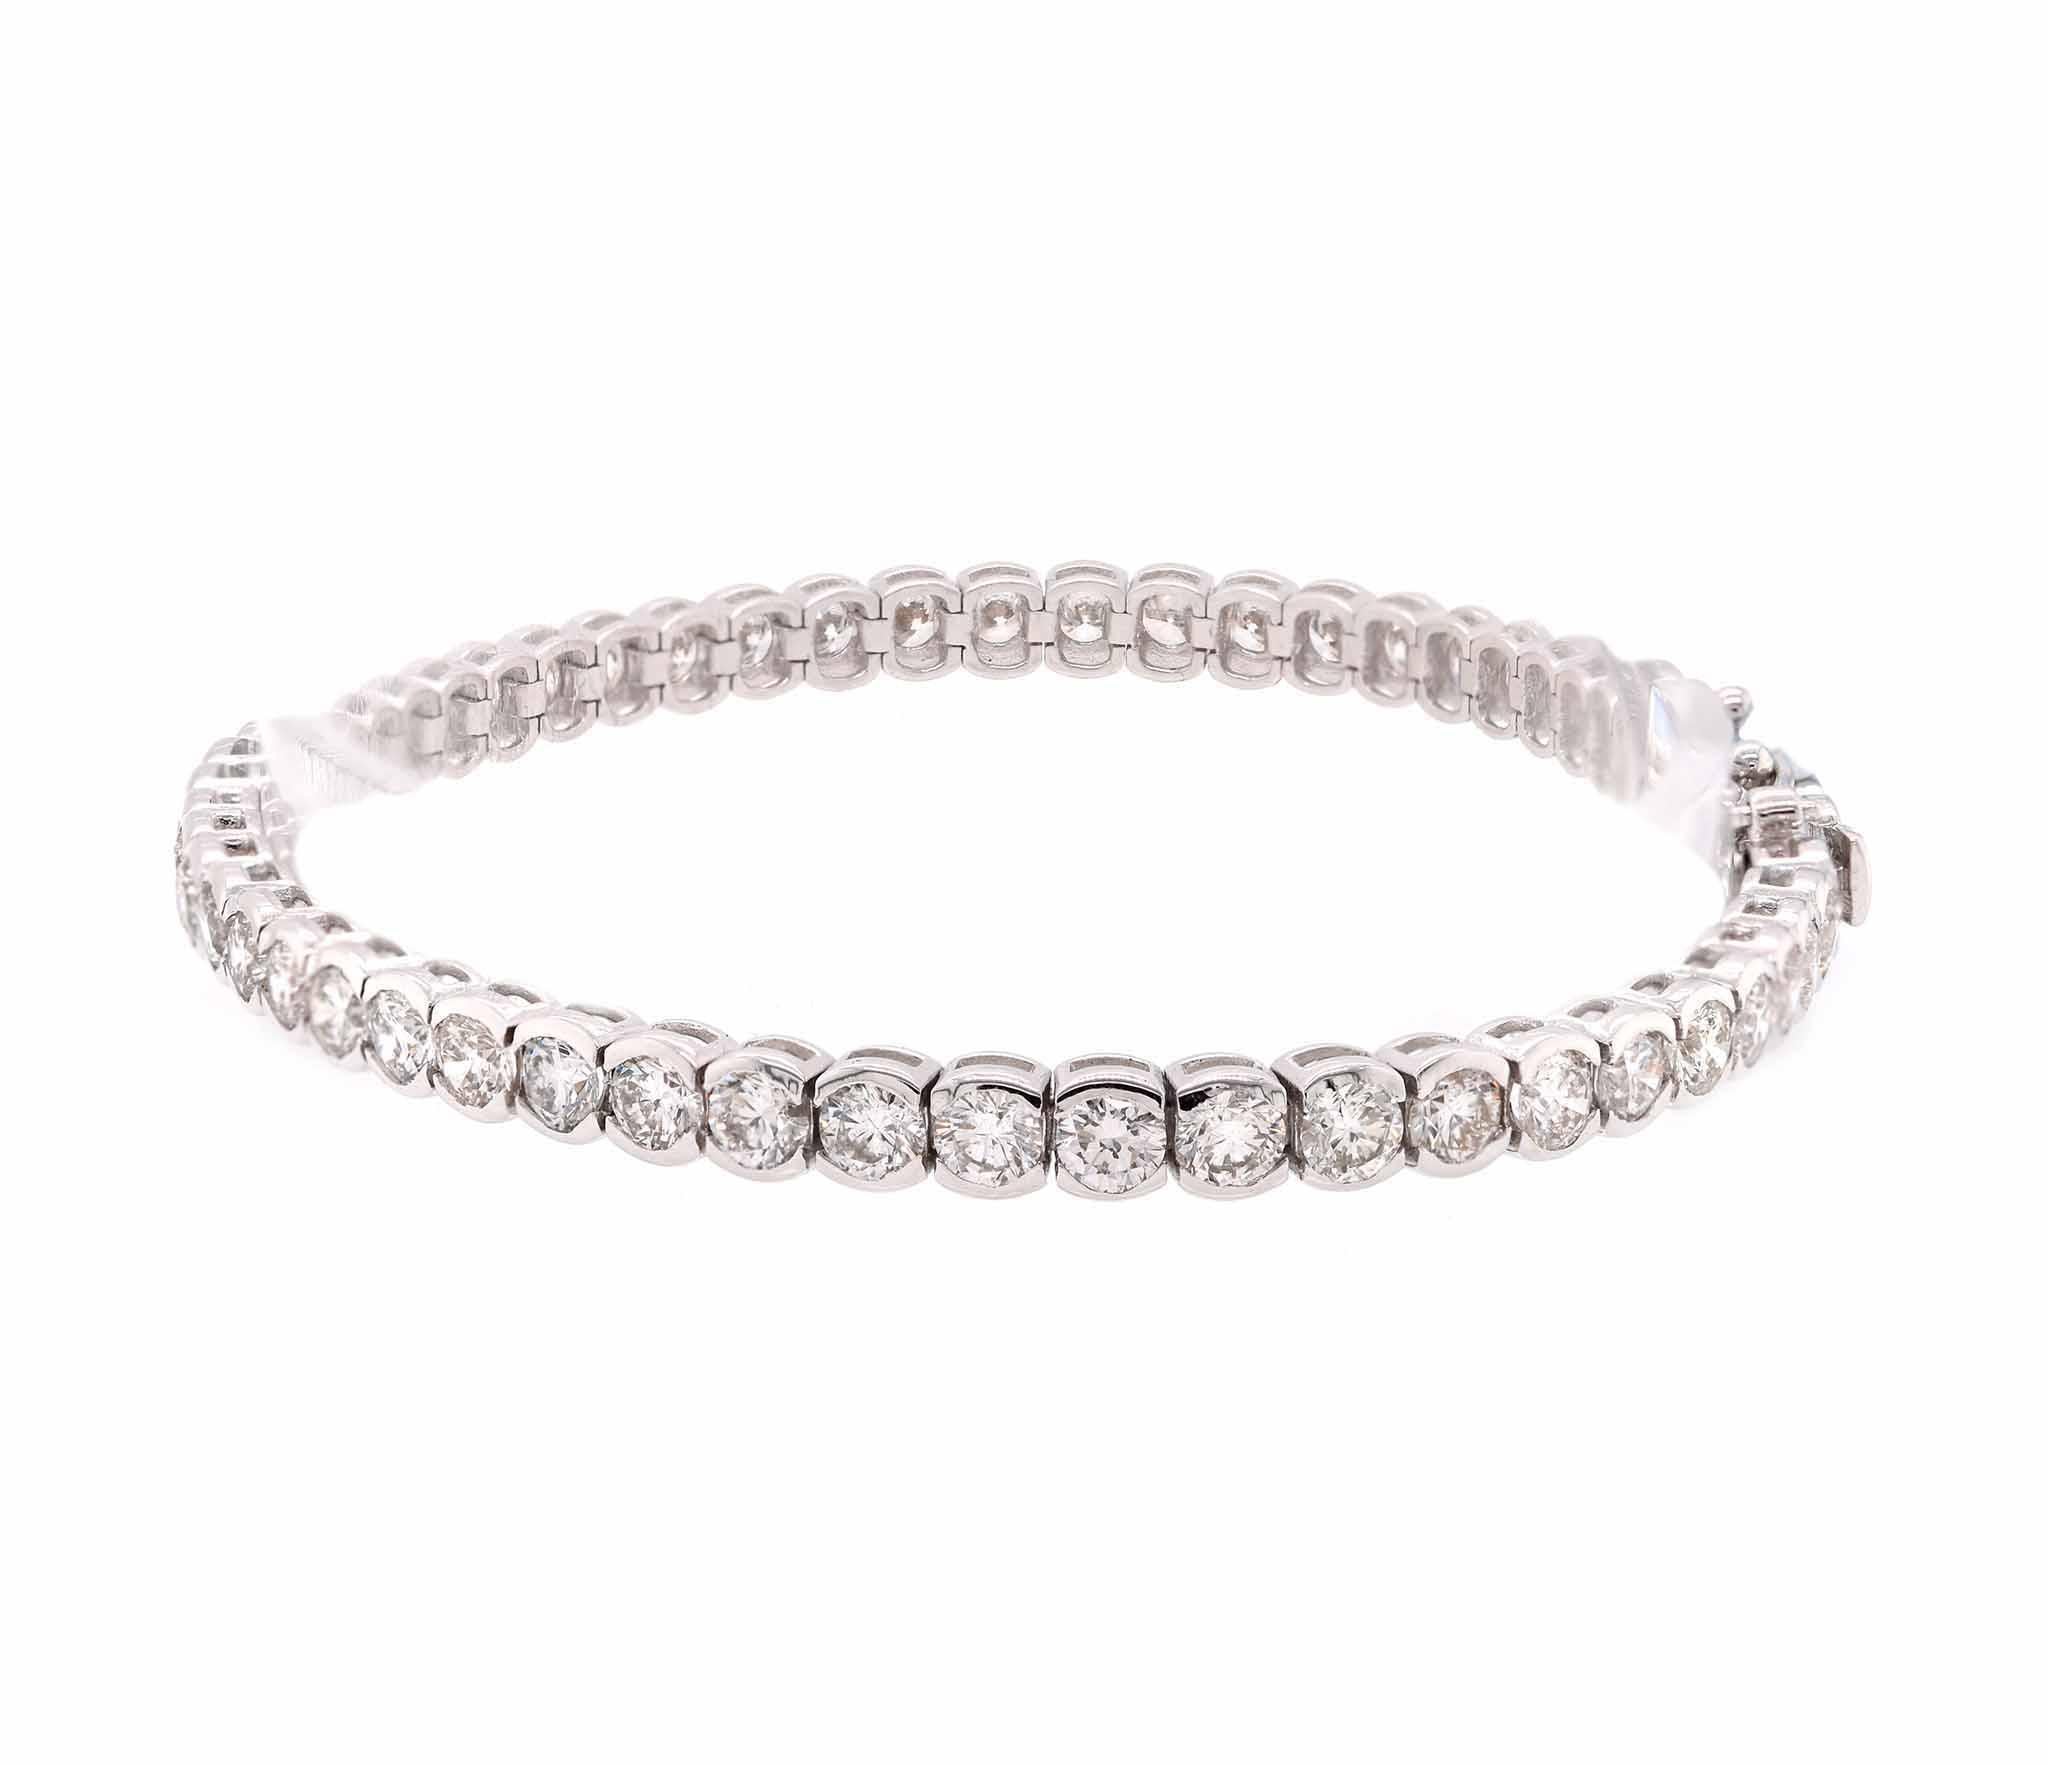 Designer: custom designed 
Material: 18K white gold
Diamonds: 55 round cut = 6.18cttw
Color: G
Clarity: VS2-SI1
Dimensions: bracelet will fit a 7-inch wrist 
Weight:  11.26 grams
